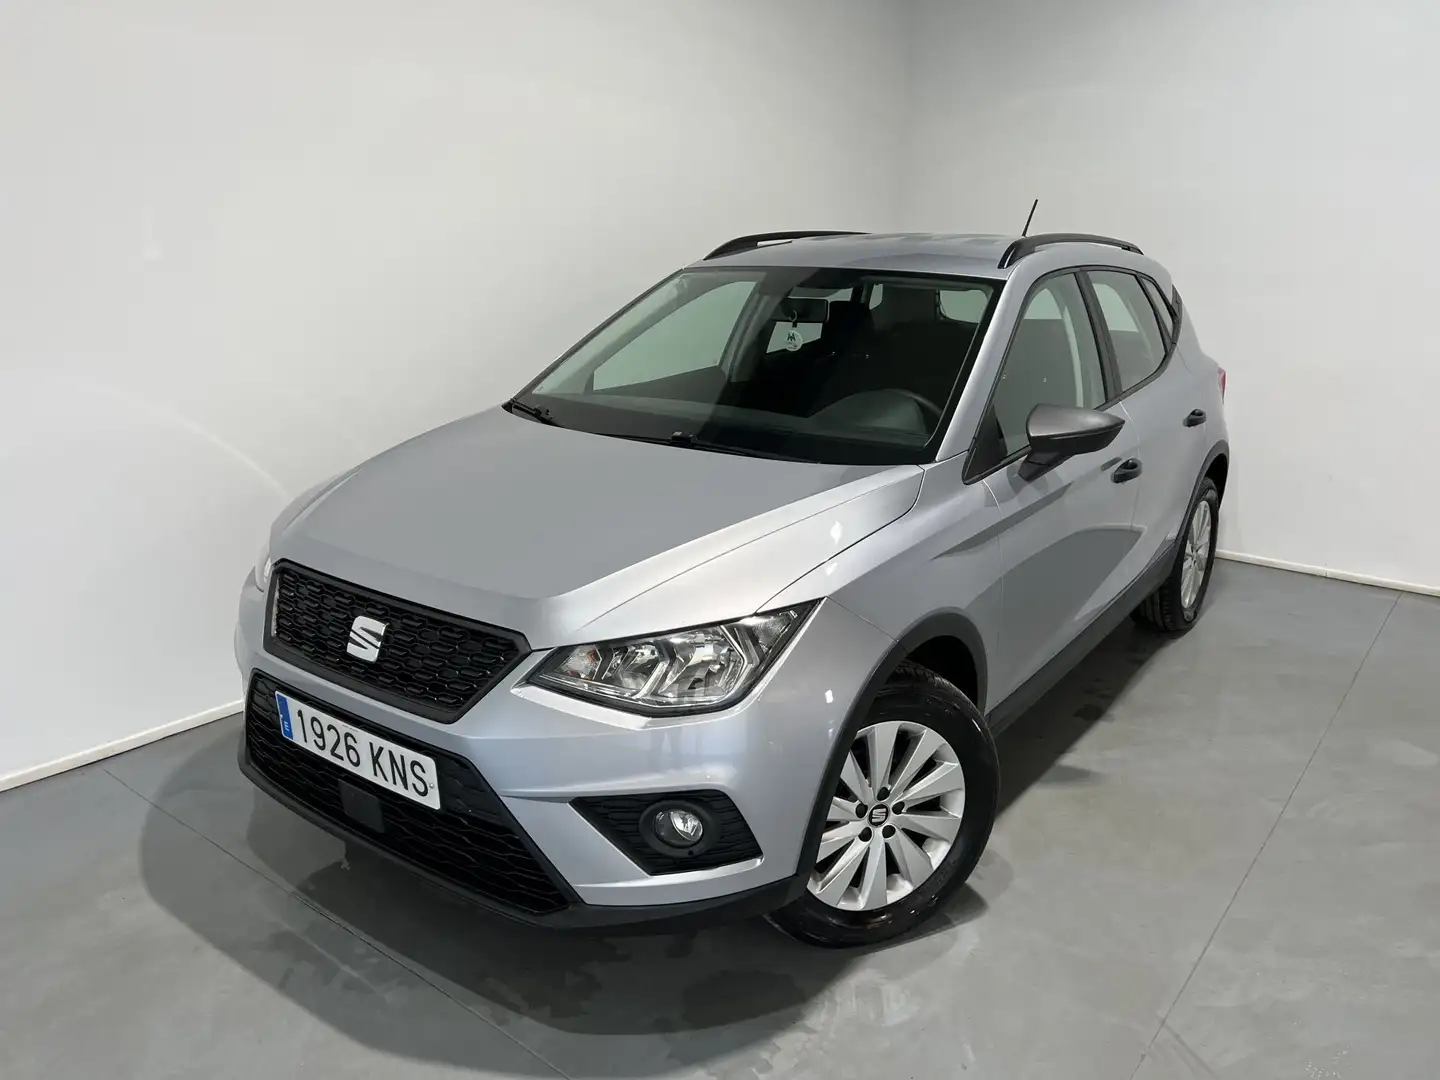 SEAT Arona 1.6TDI CR S&S Reference Plus 95 Argent - 1